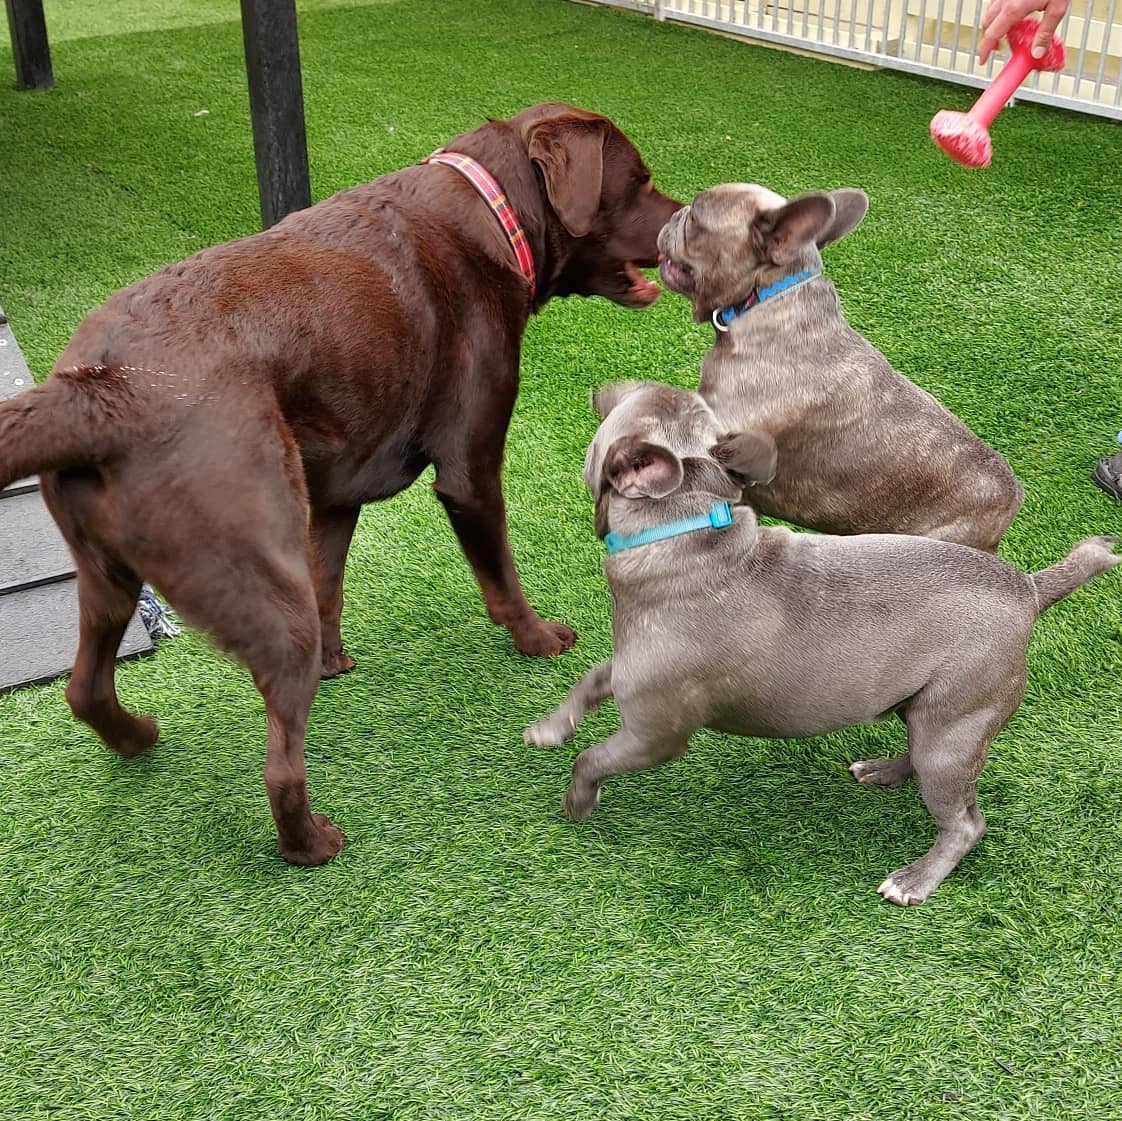 daycare dogs playing outdoors